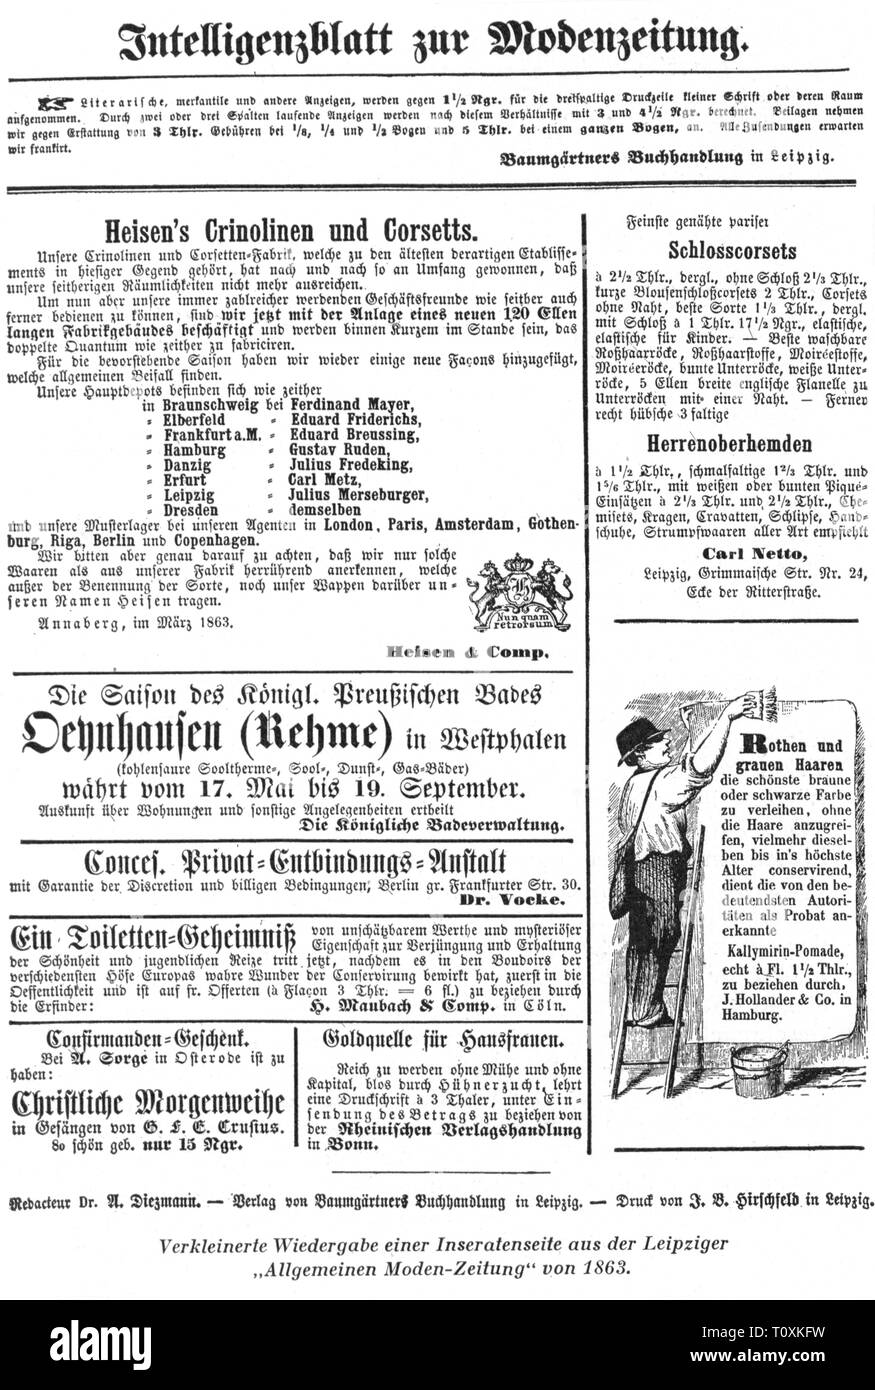 advertising, press / media, ad-page, from: 'Allgemeine Moden-Zeitung', Leipzig, 1863, Artist's Copyright has not to be cleared Stock Photo